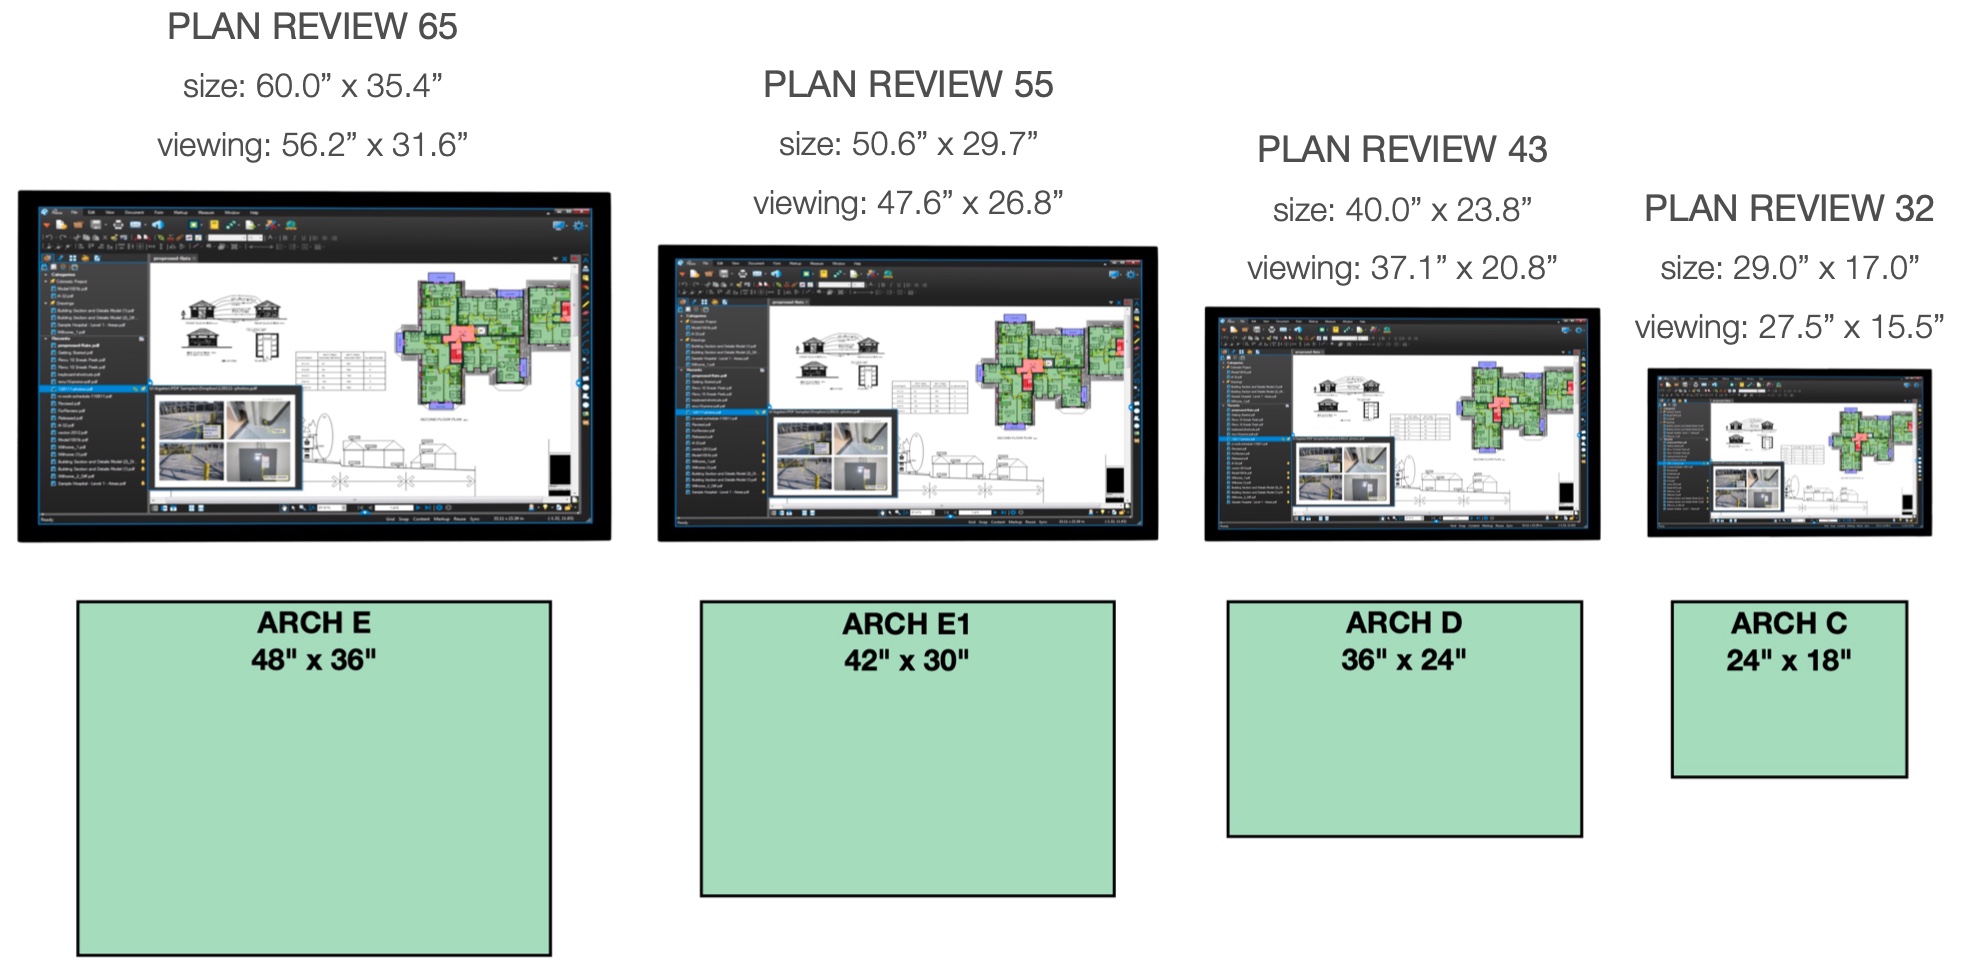 plan review touch screen arch sizes